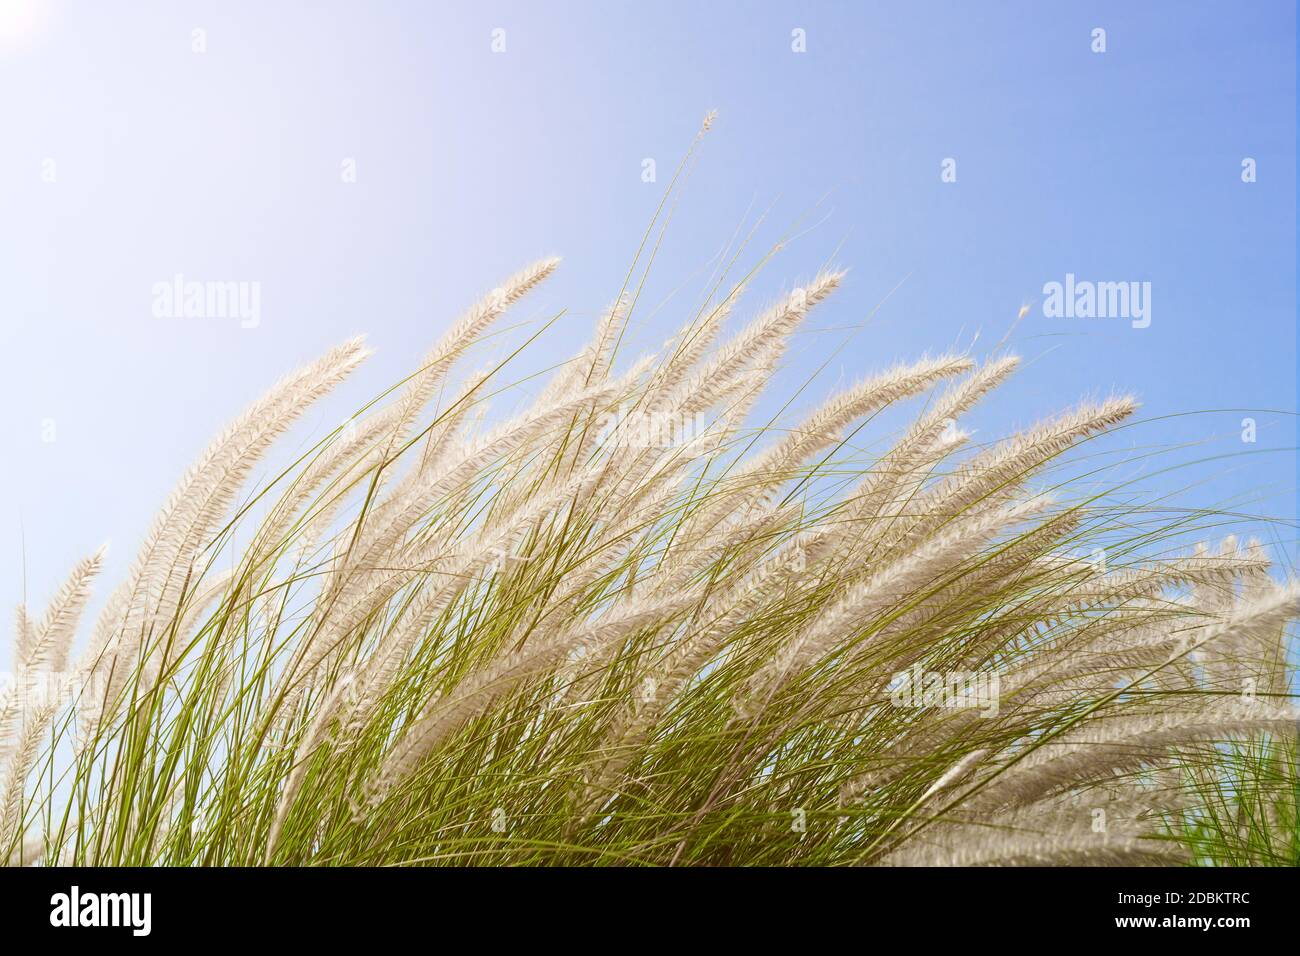 Fourtain grass or Imperata cylindrica Beauv of Feather grass in nature agent blue sky Stock Photo